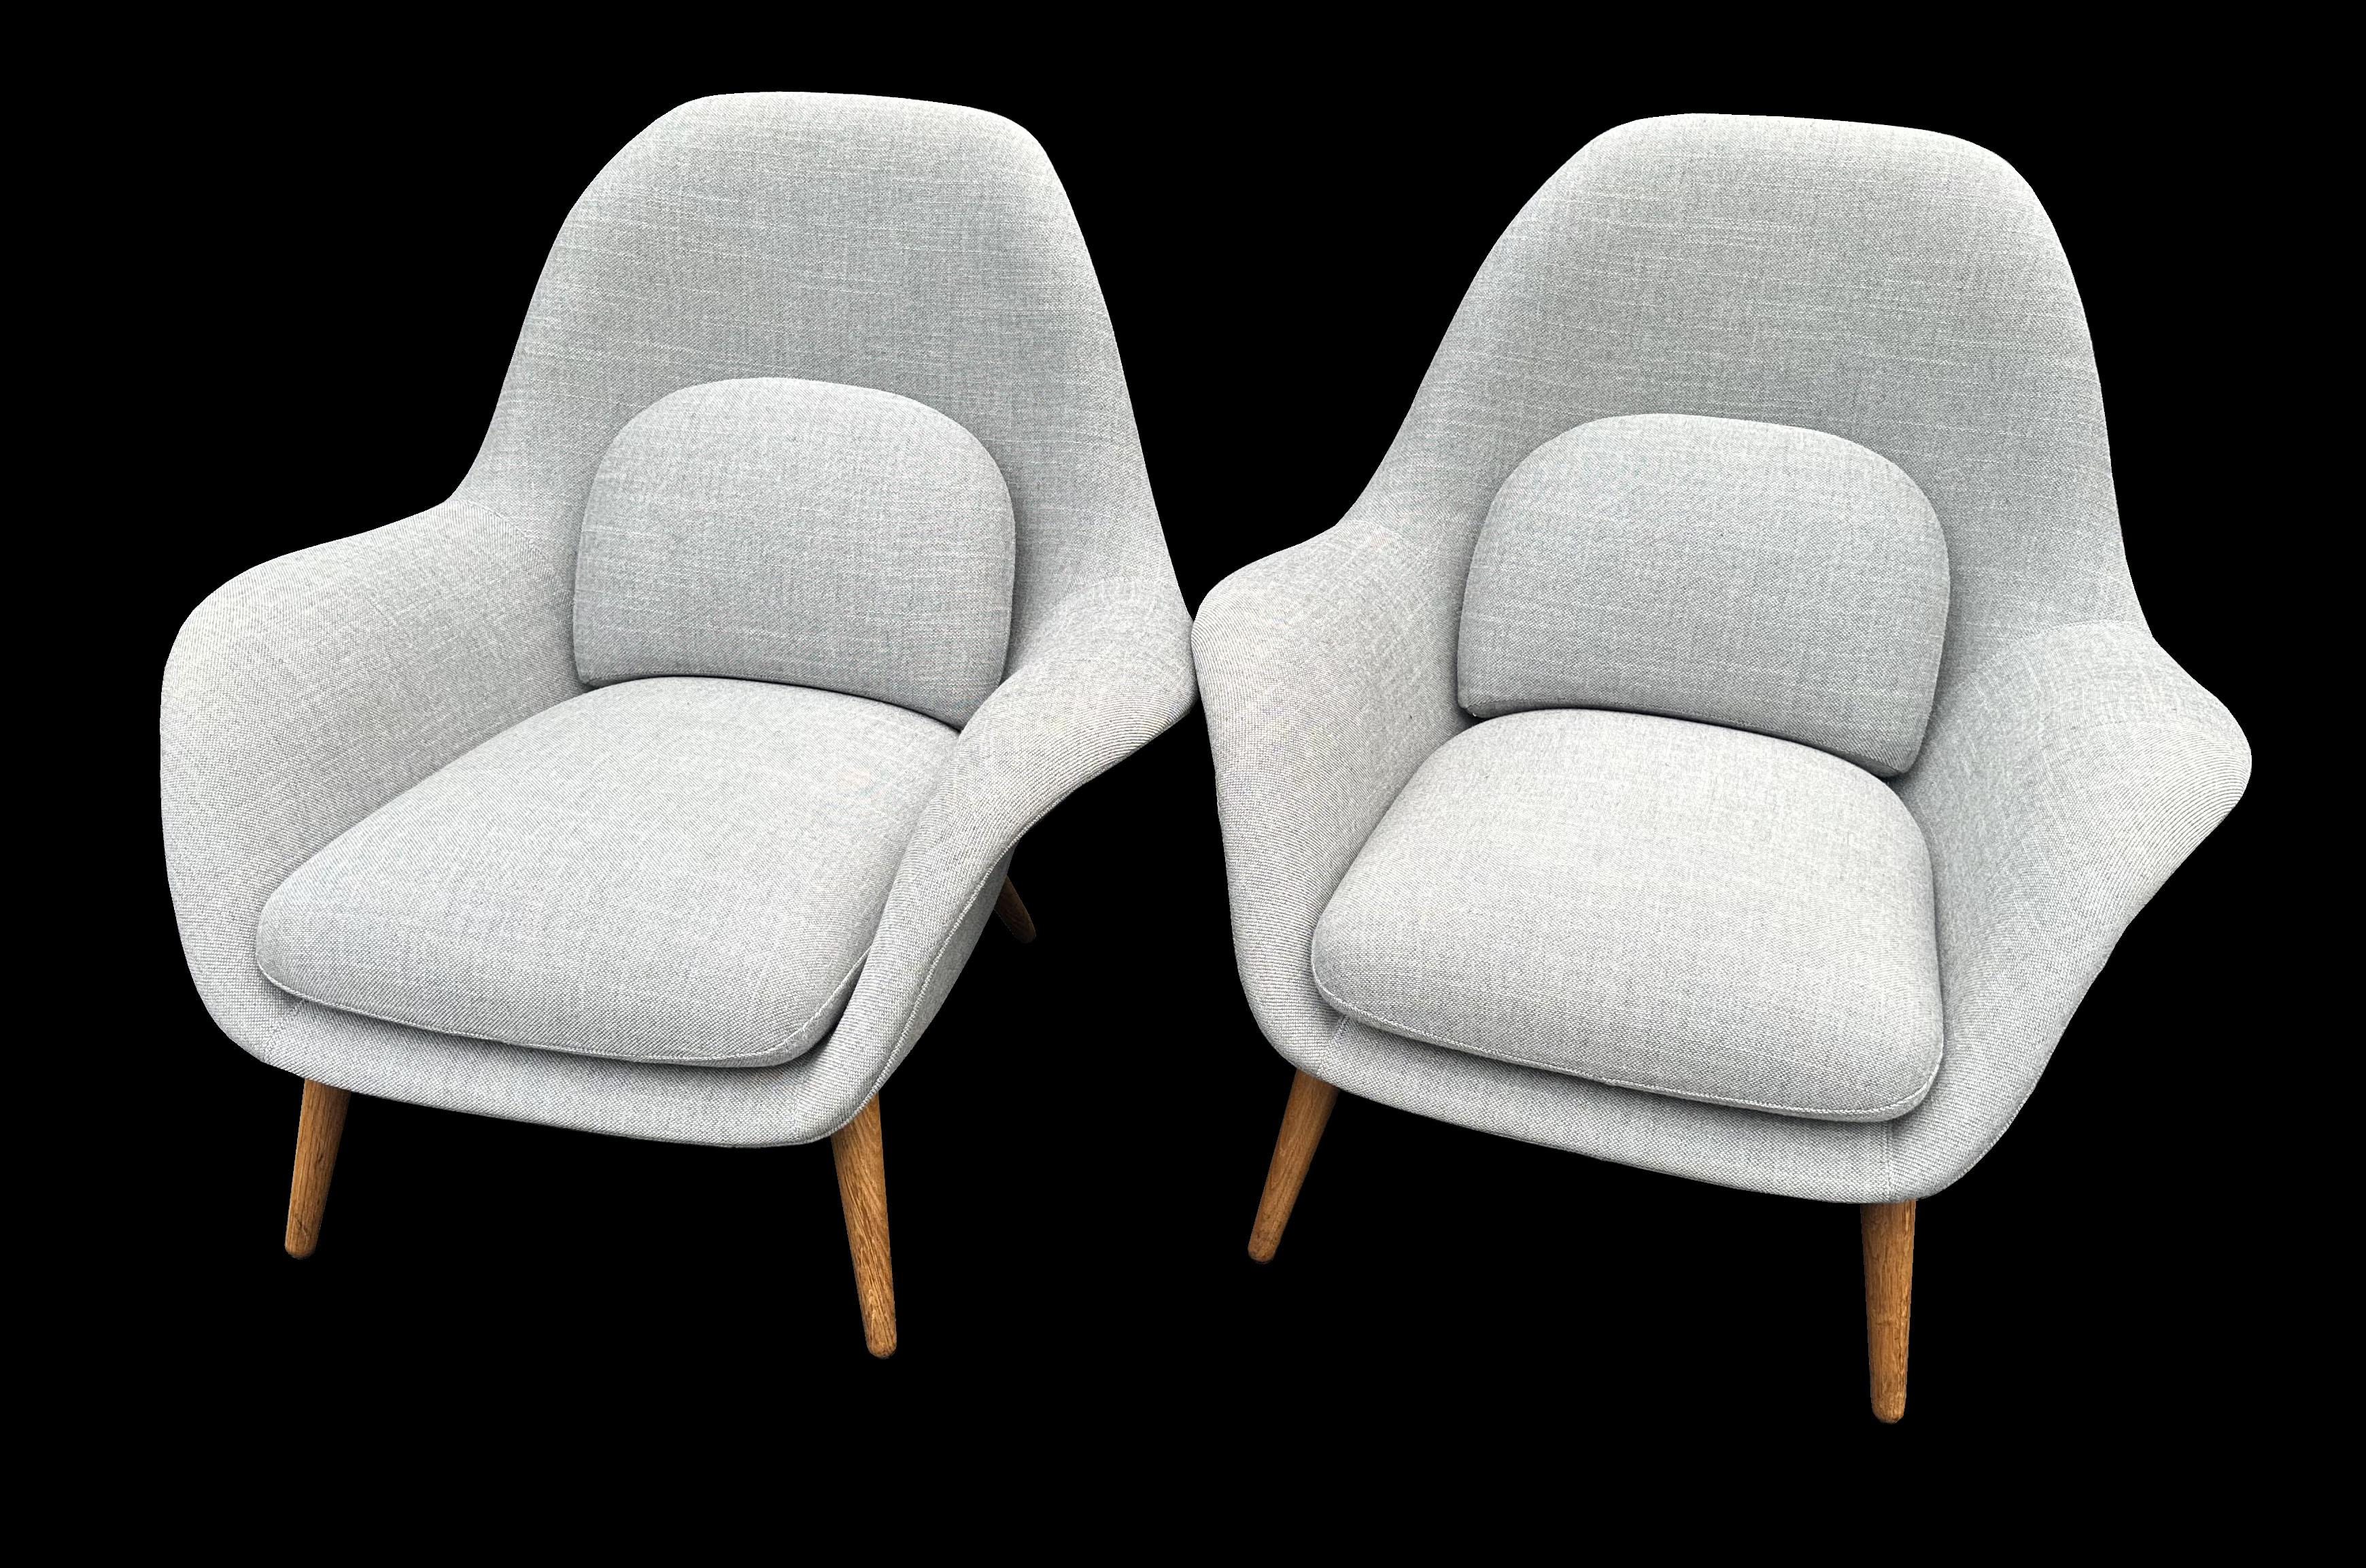 Pair of 'Swoon' Chairs by Space Copenhagen for Fredericia For Sale 1